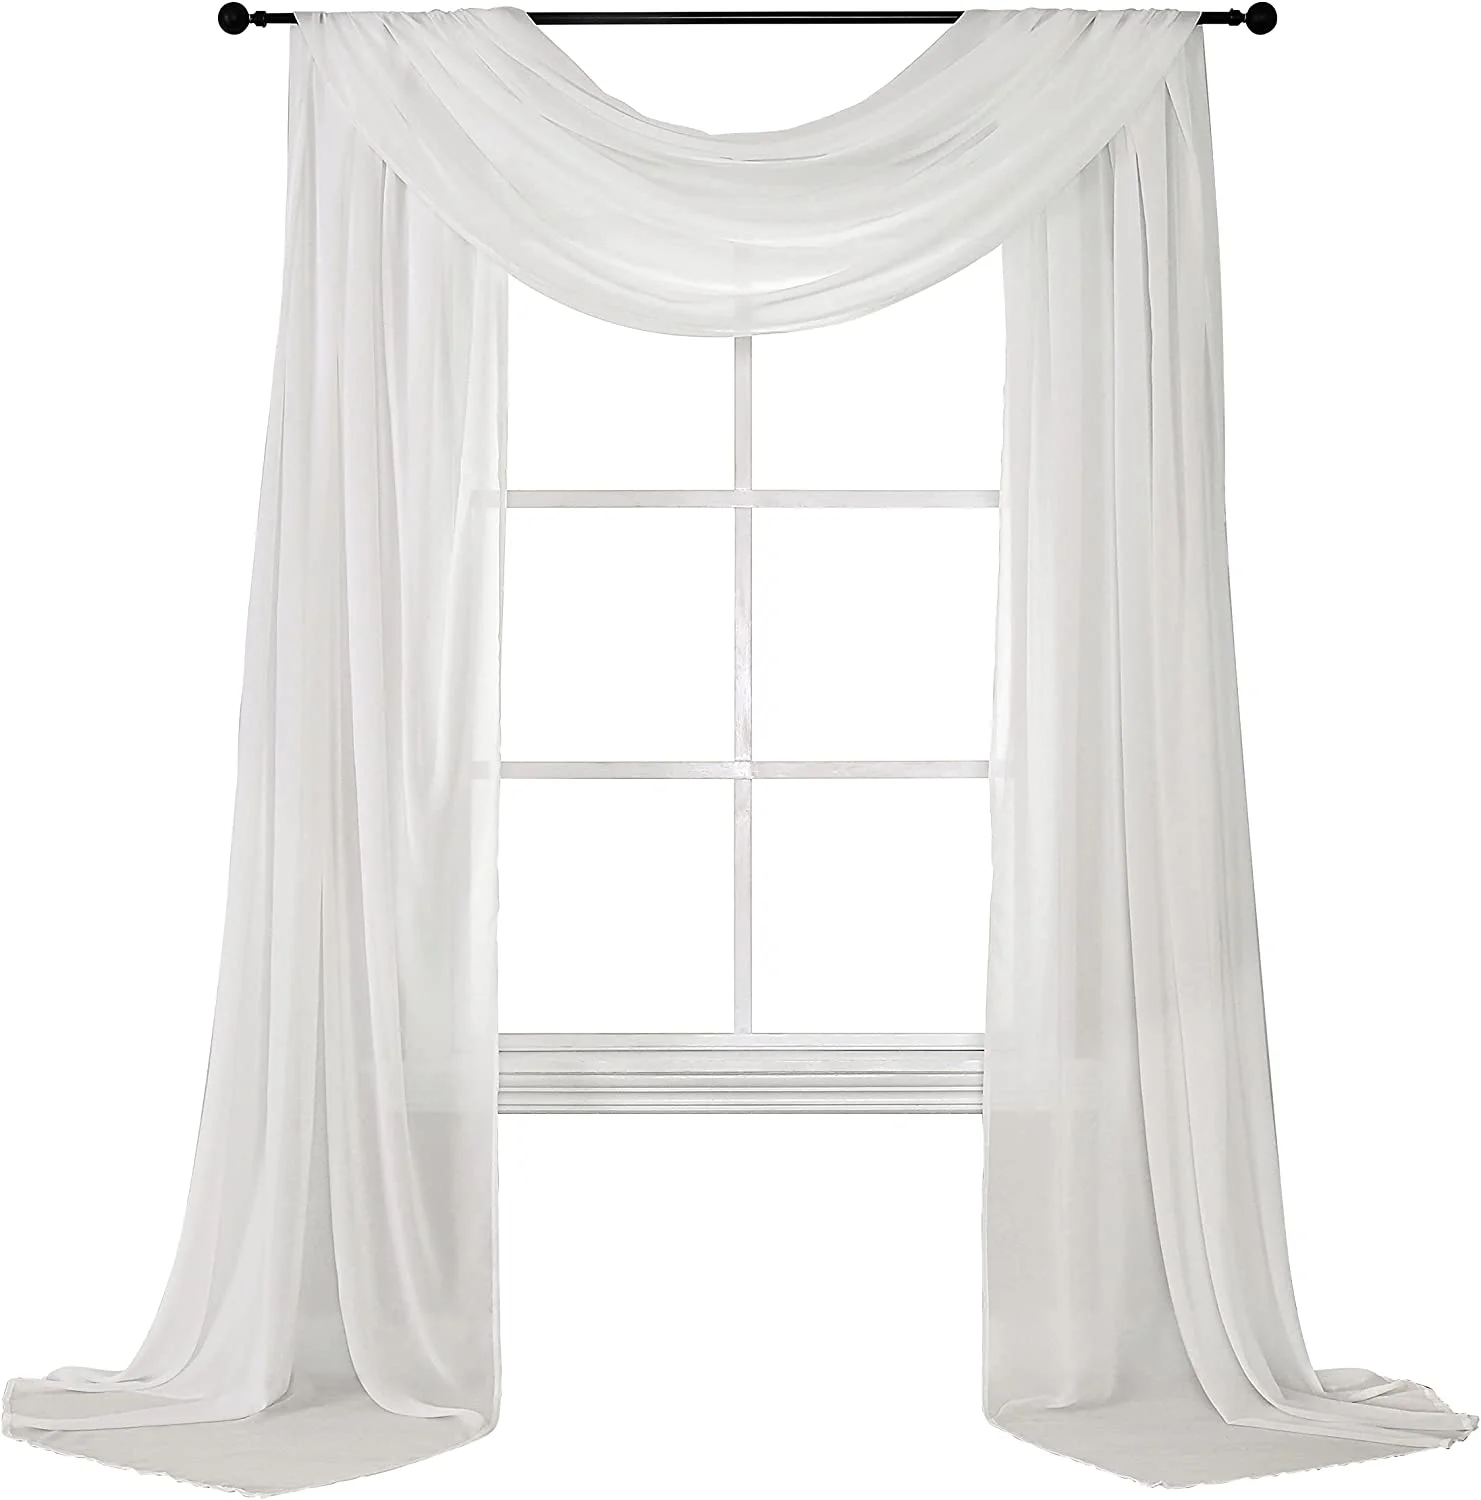 White Sheer Scarf Window Curtain Soft Chiffon Extra Long Canopy Bed Curtains Panel Swag Valance for Living Room Wedding